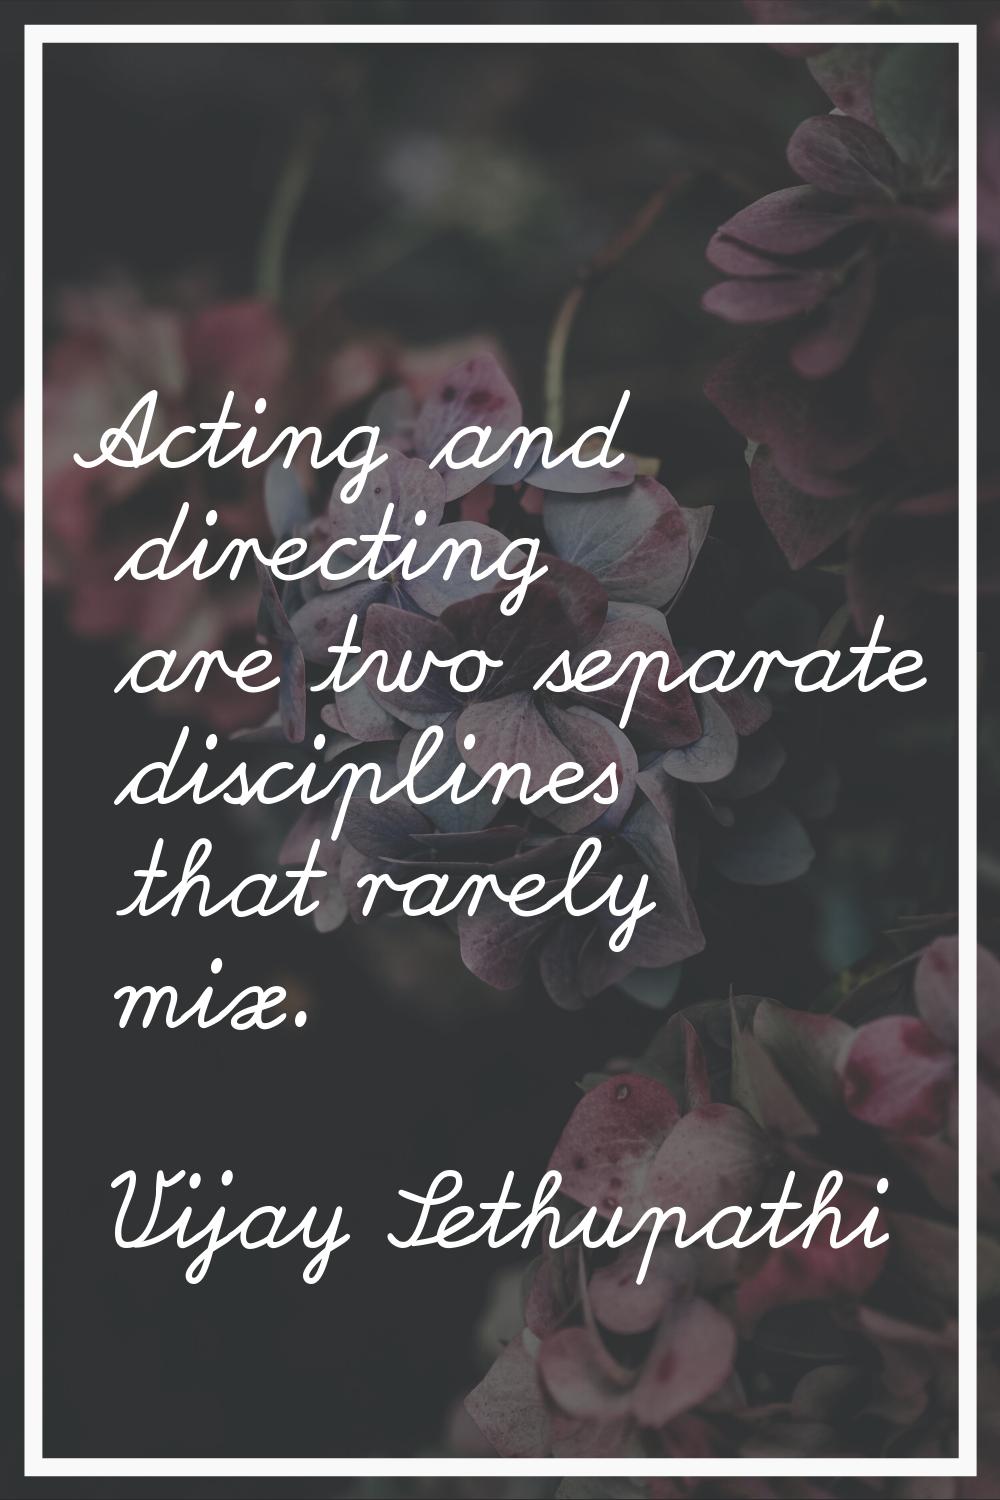 Acting and directing are two separate disciplines that rarely mix.